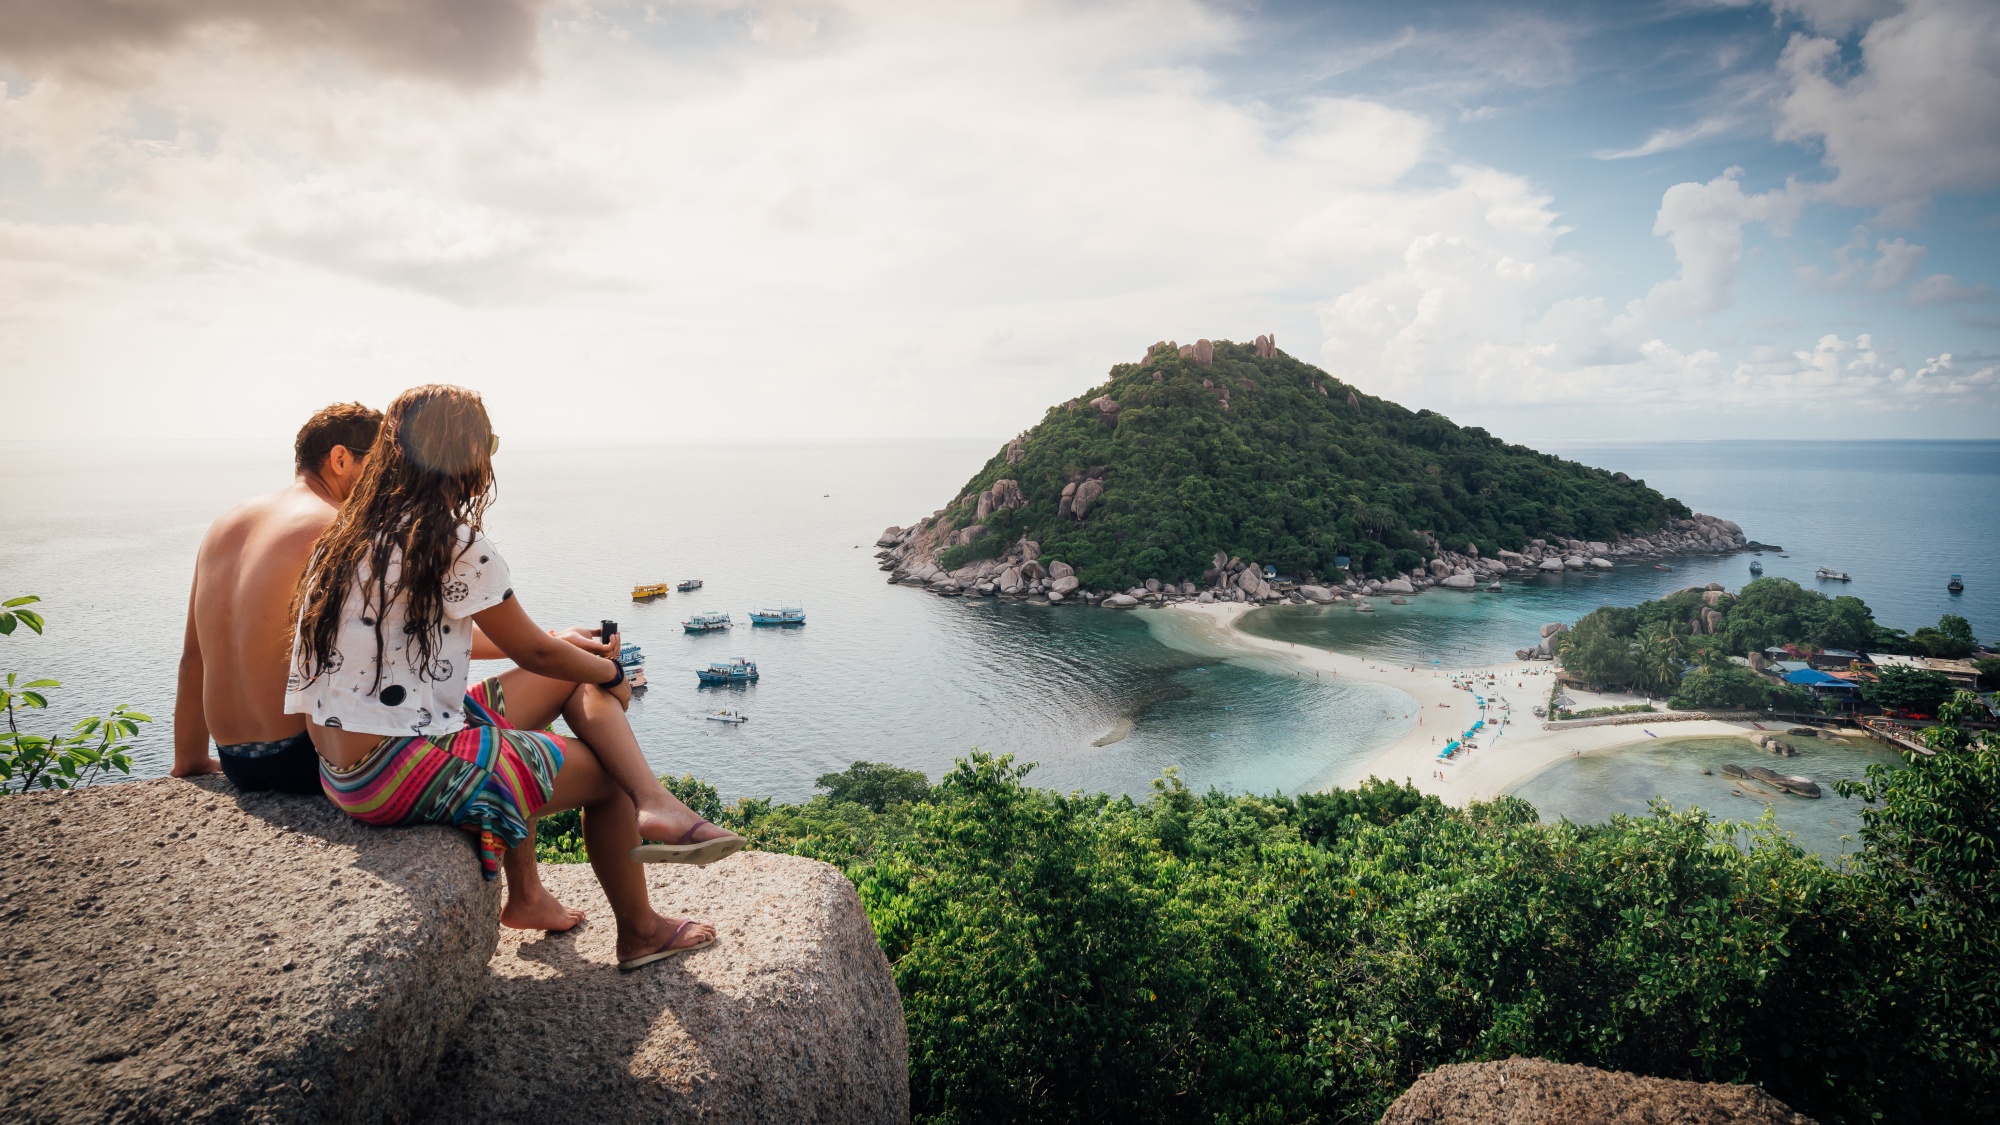 Happy,Romantic,Couple,Enjoying,At,Viewpoint,On,Island,travel,Vacation,Lifestyle